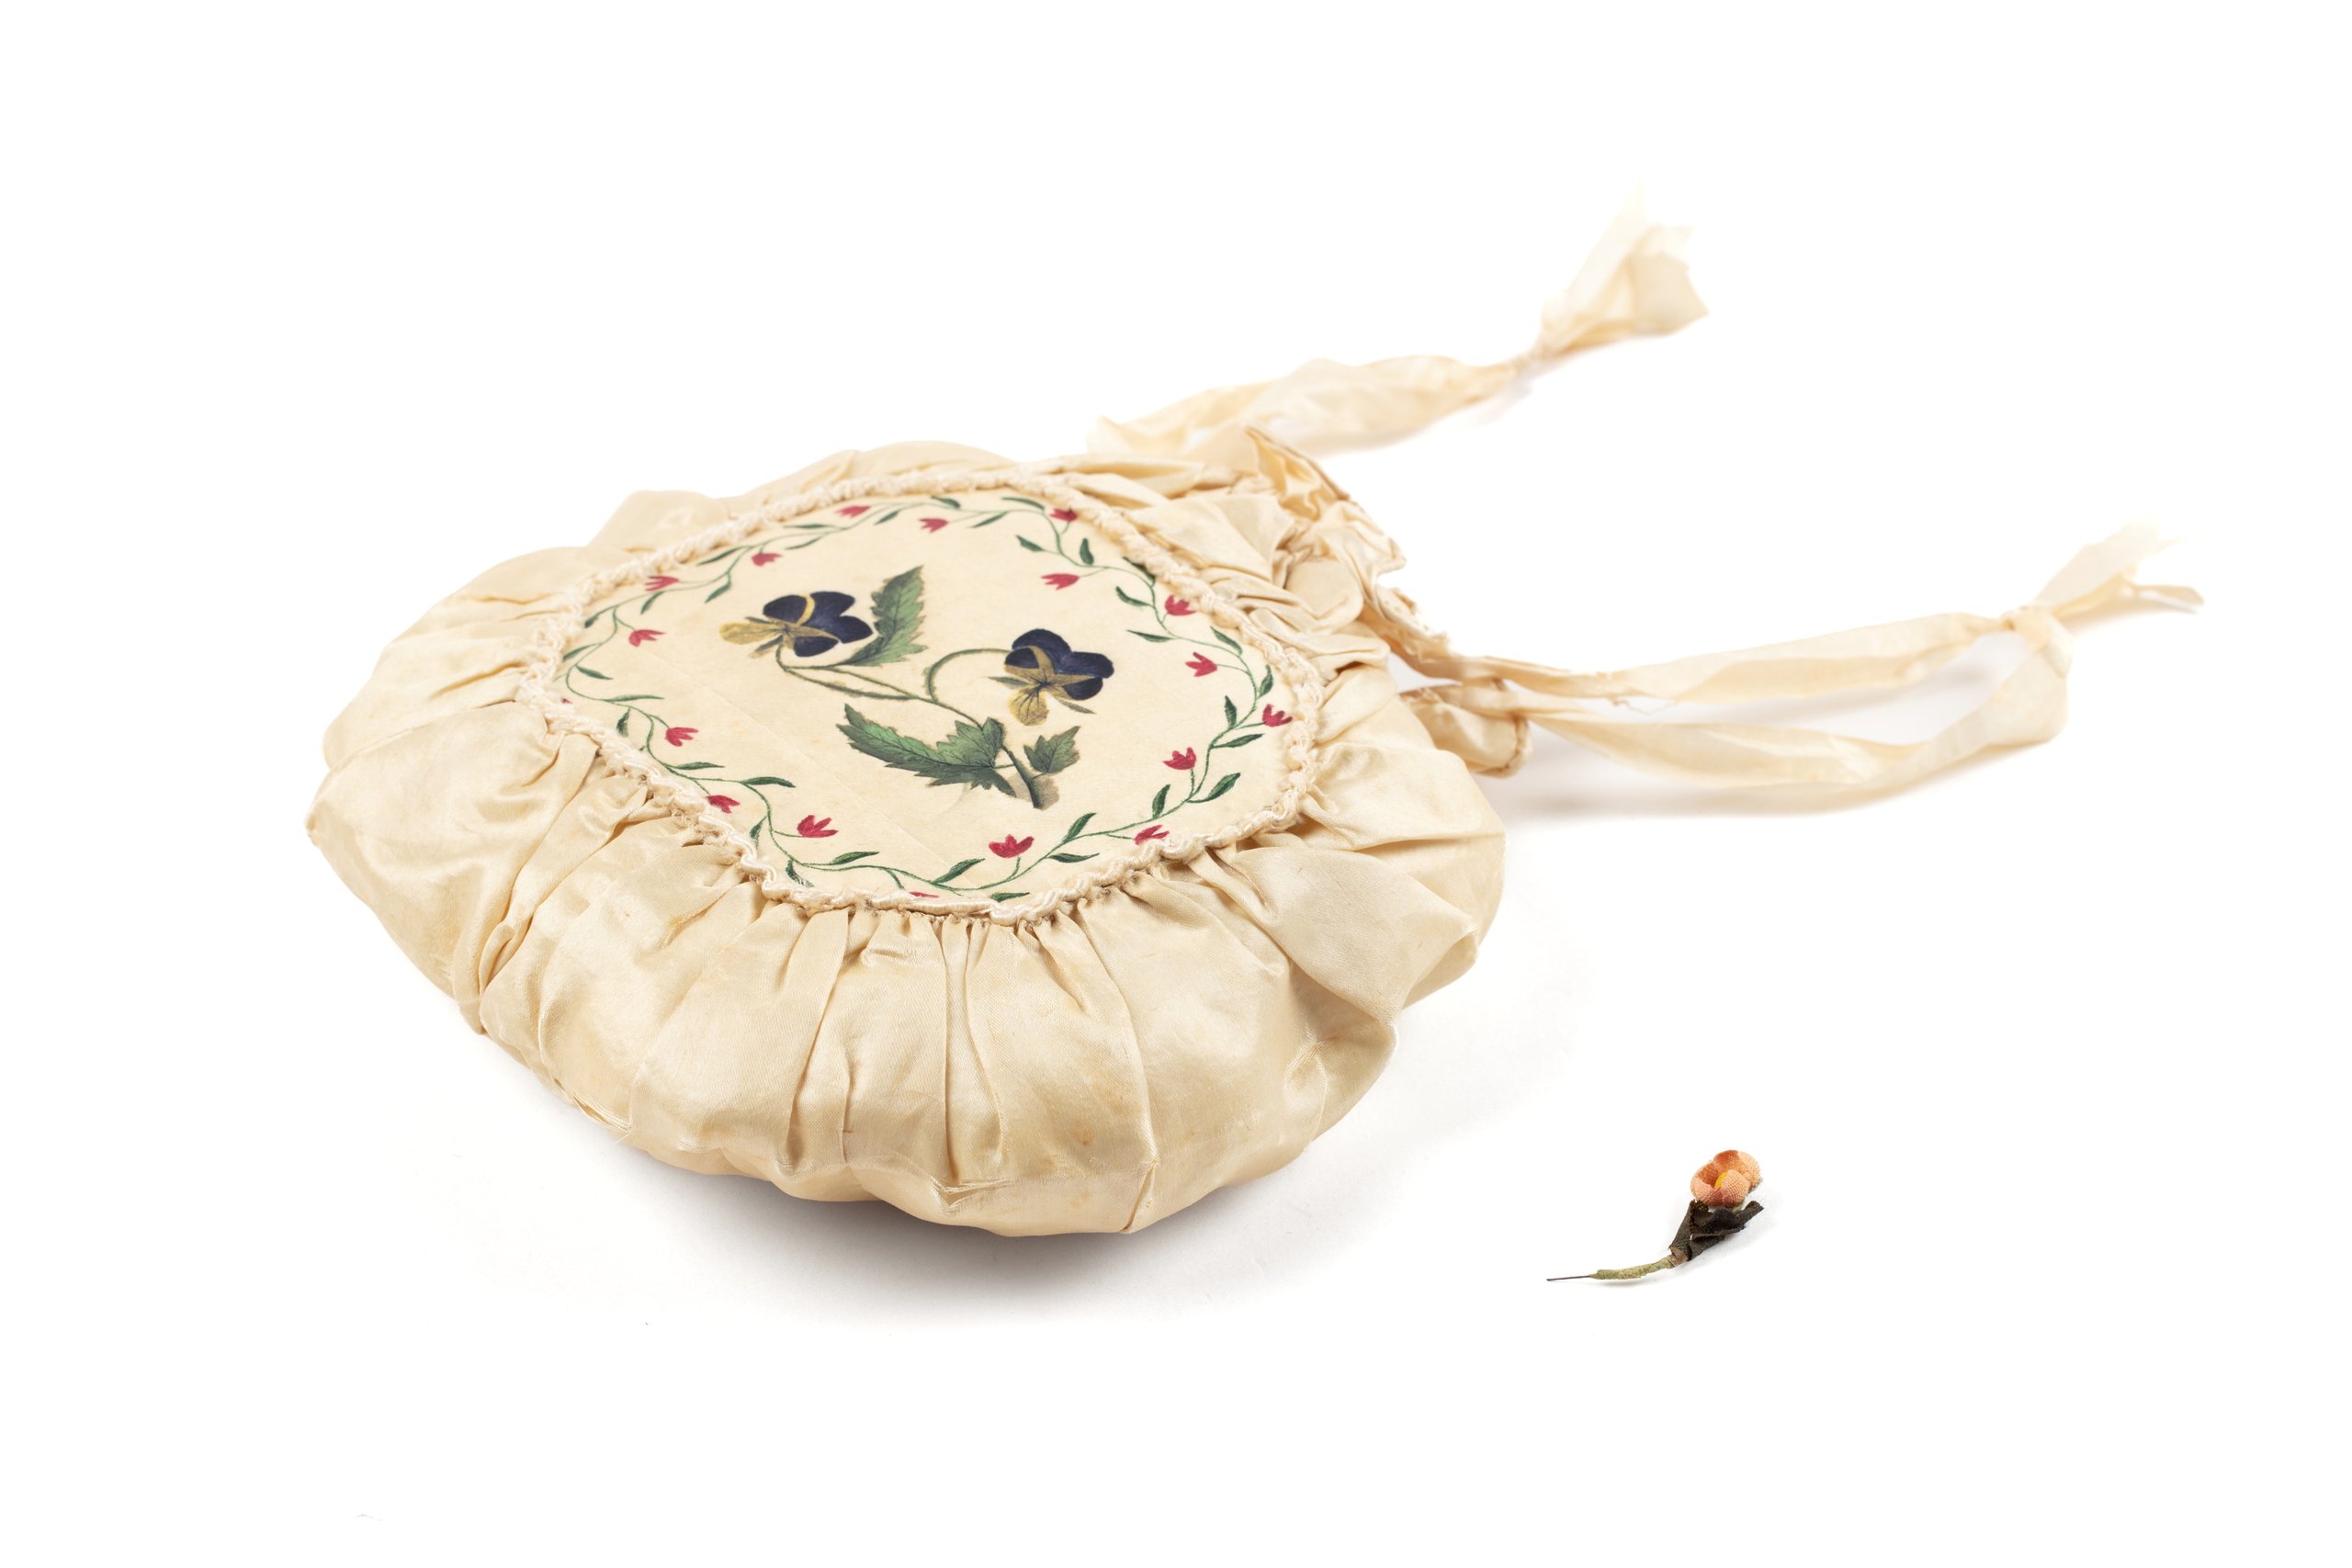 Drawstring purse used by Agnes Thompson at her wedding